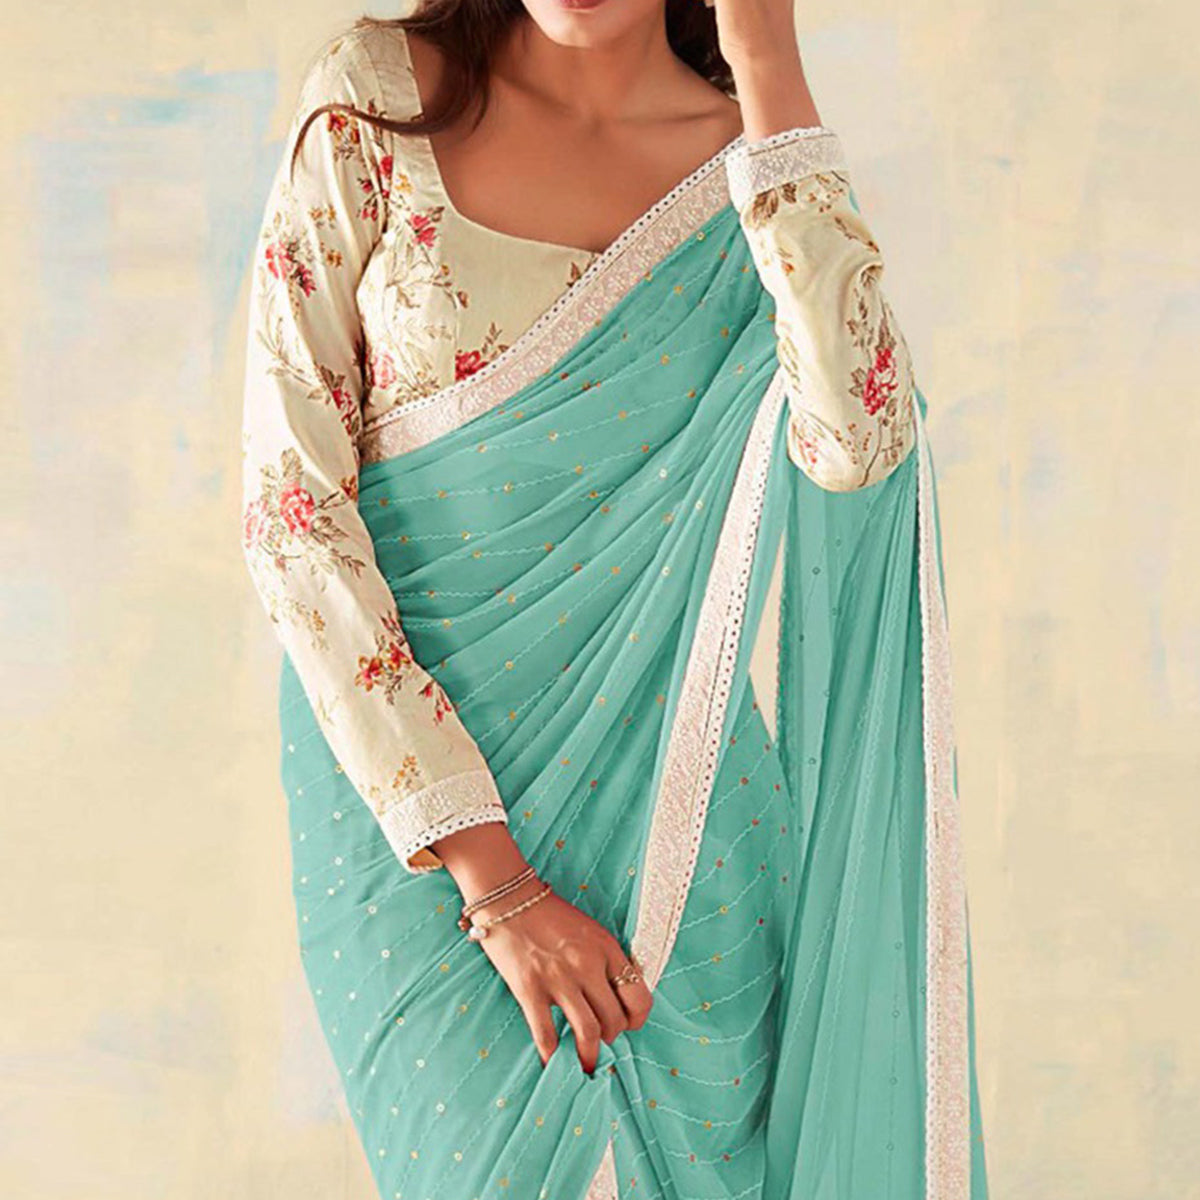 Aqua Blue Foil Printed Georgette Saree With Embroidered Border